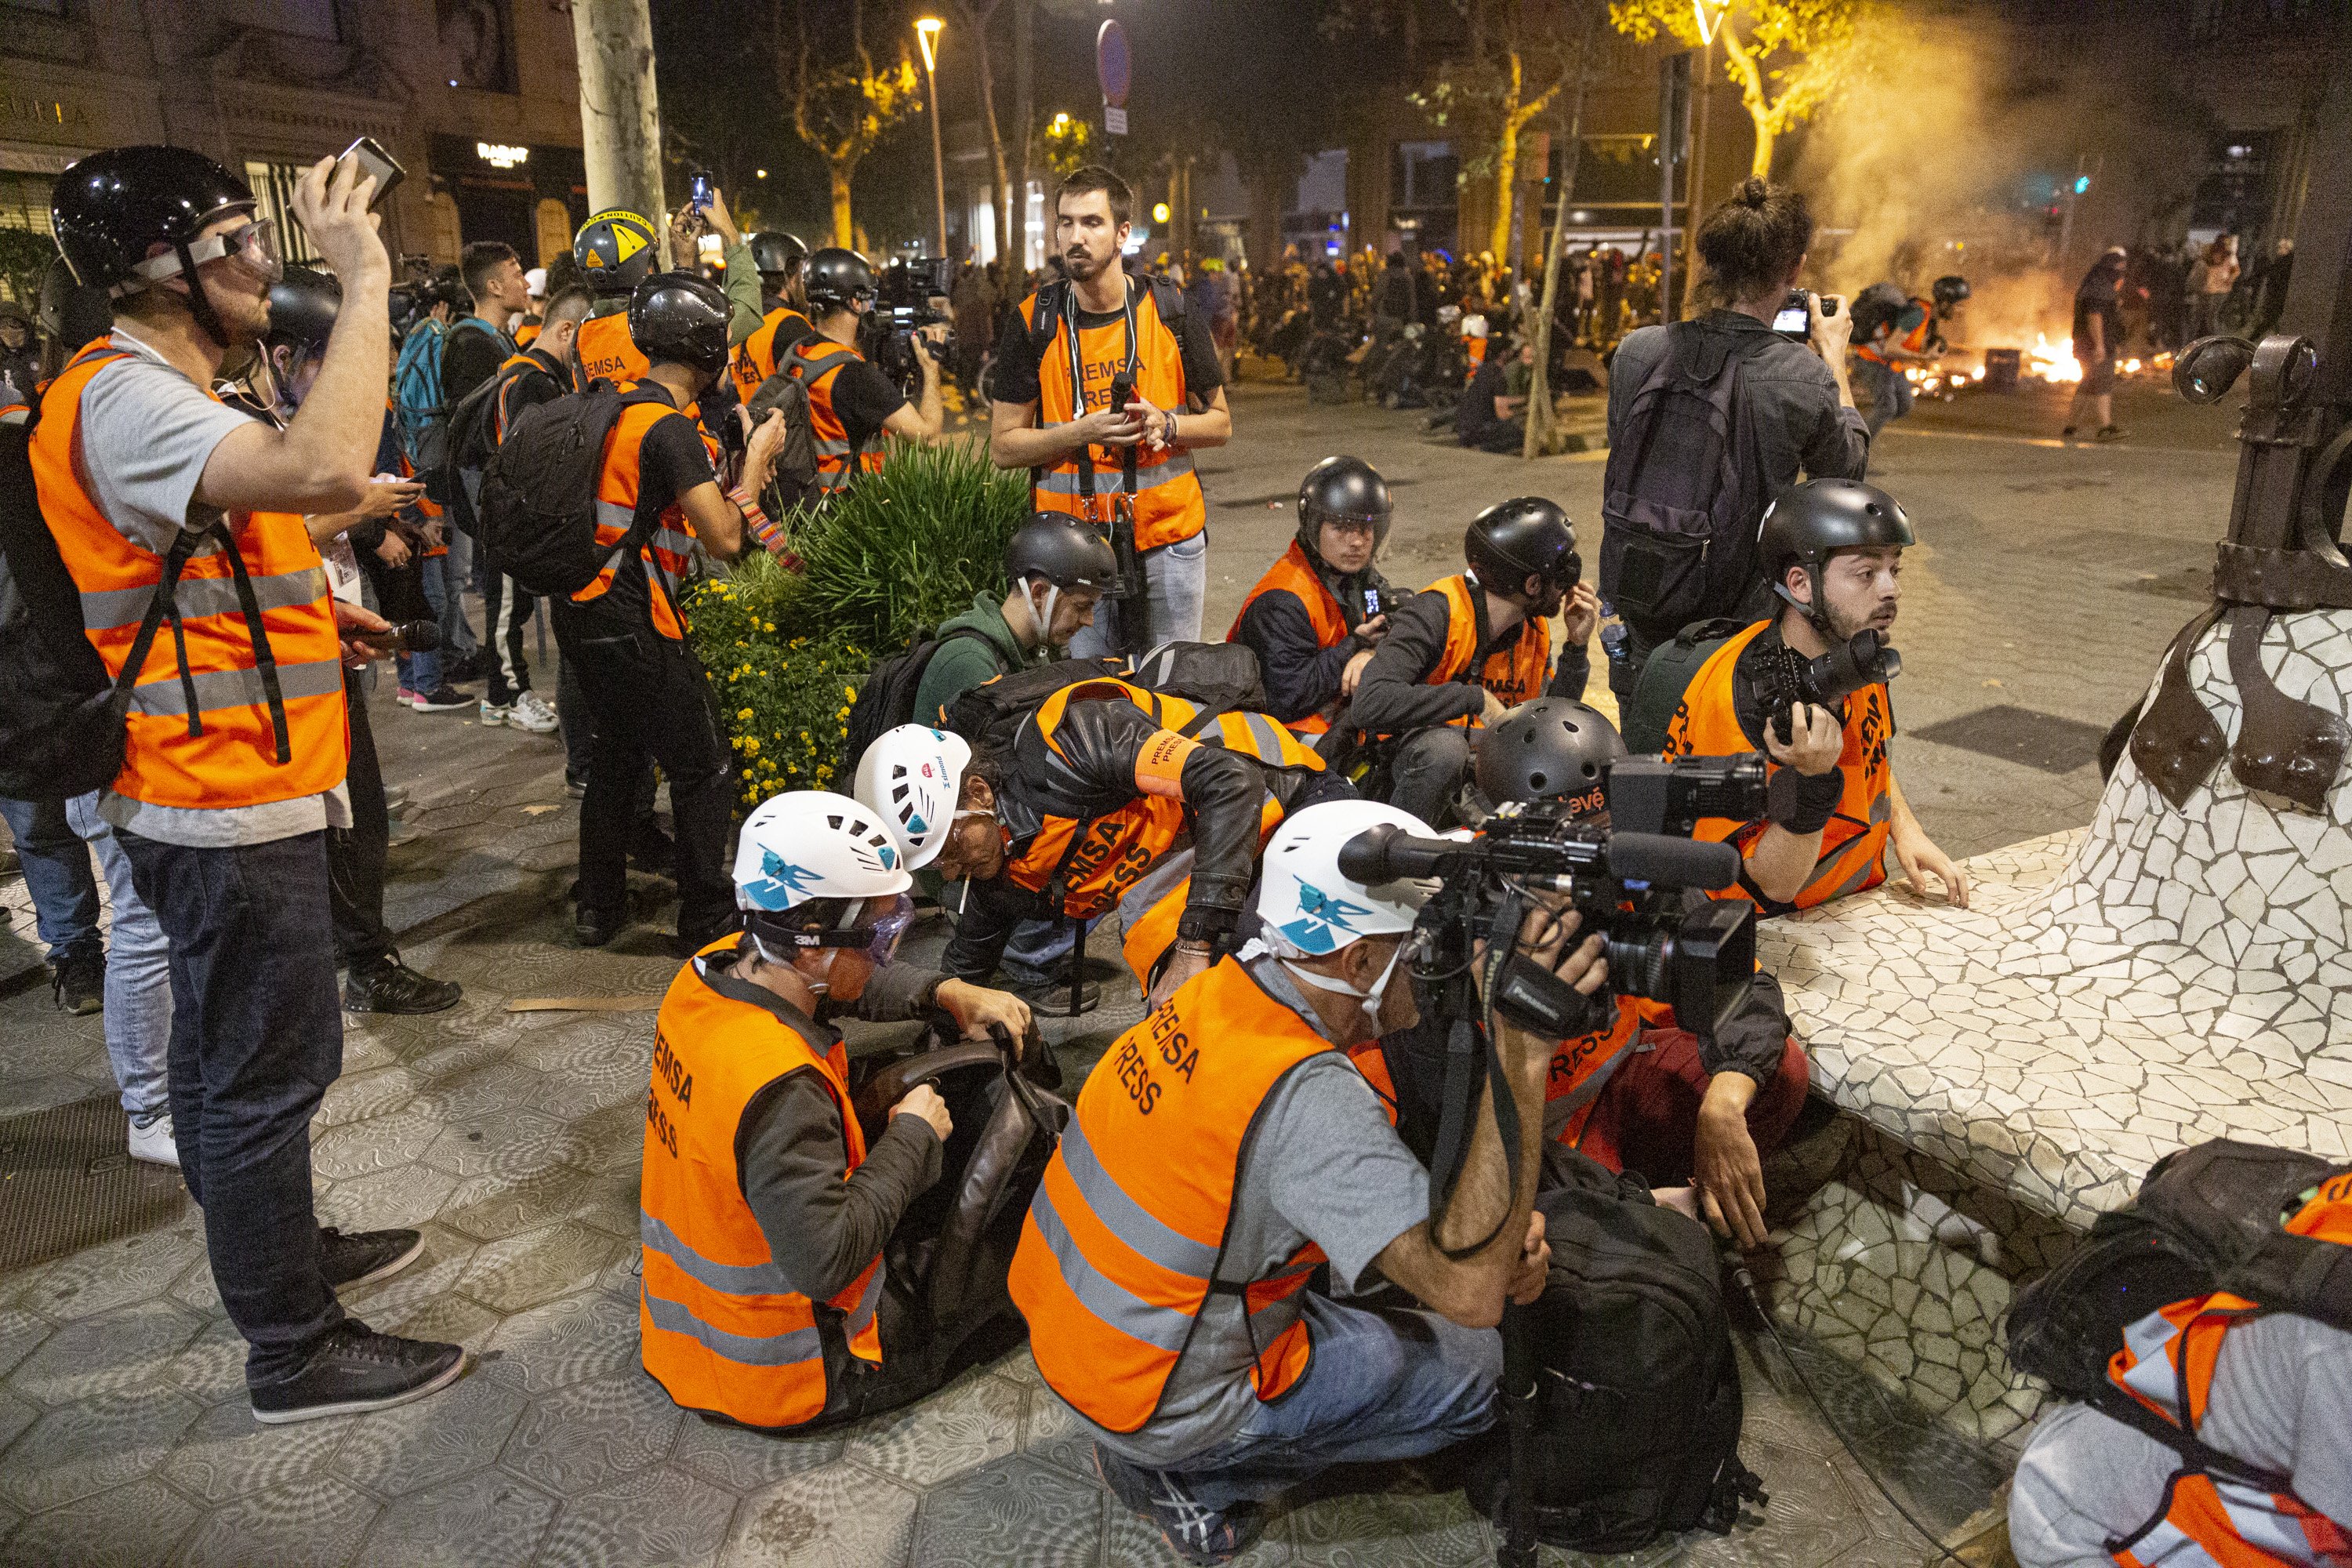 Press freedom concerns raised in Catalonia by police attacks on journalists